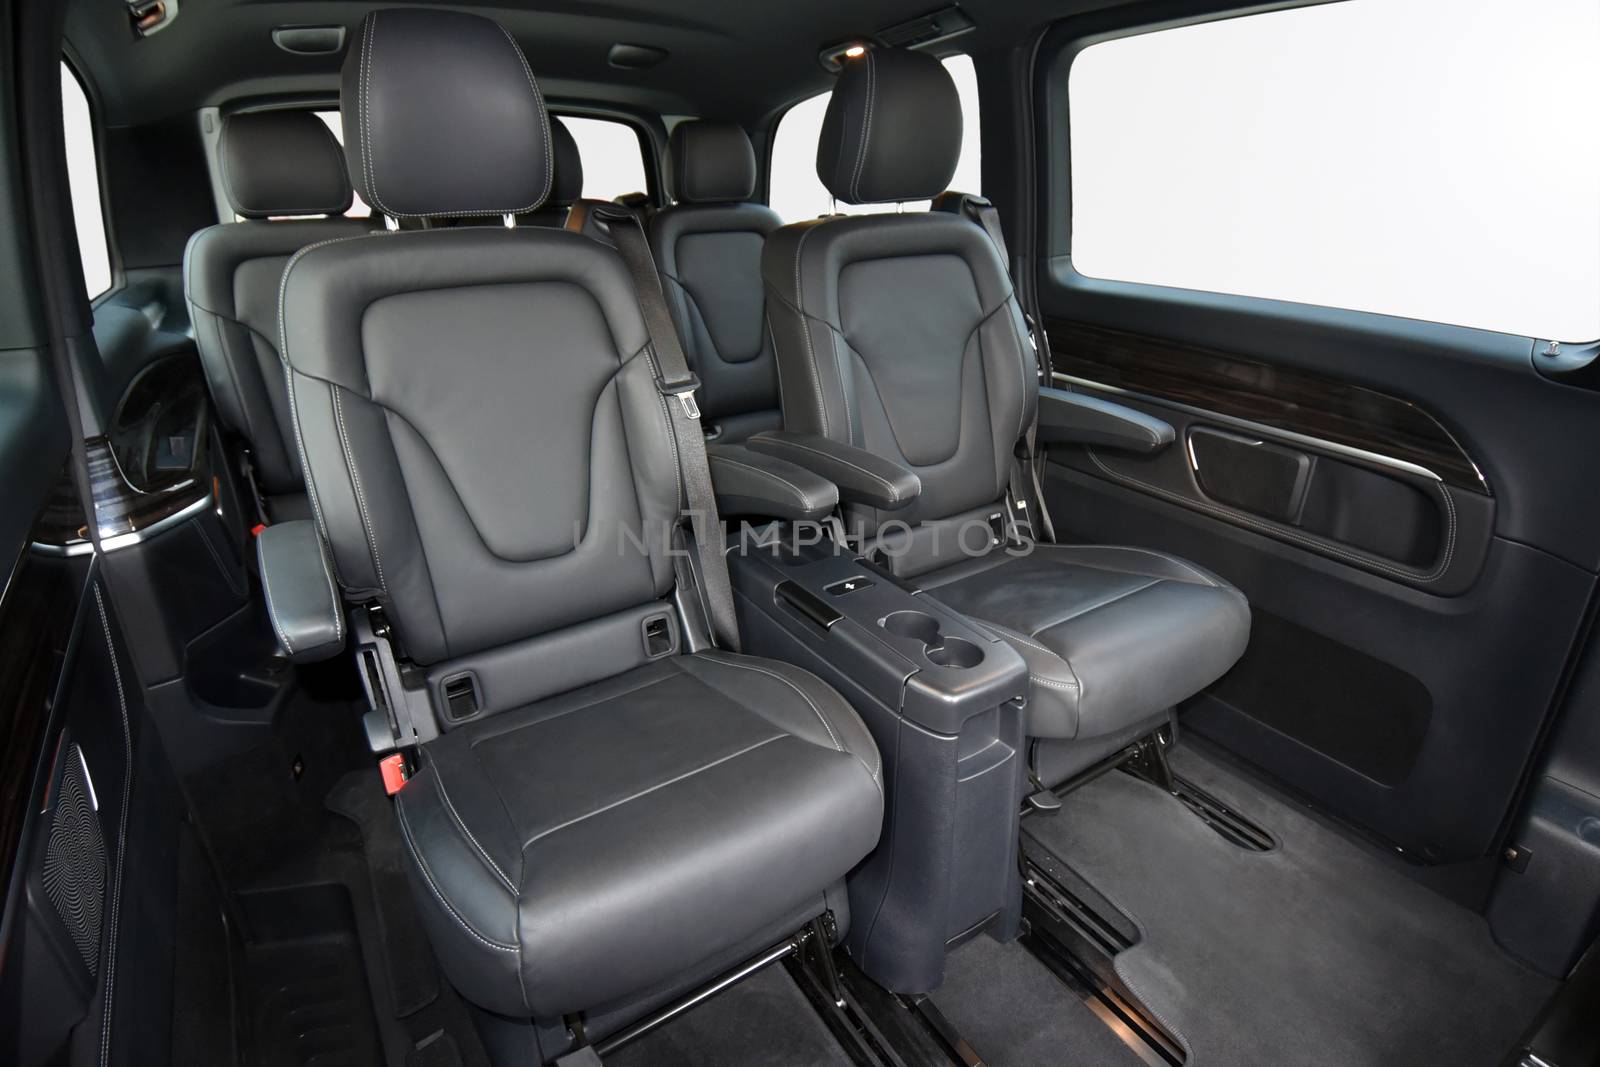 Luxury leather seats in the van by aselsa